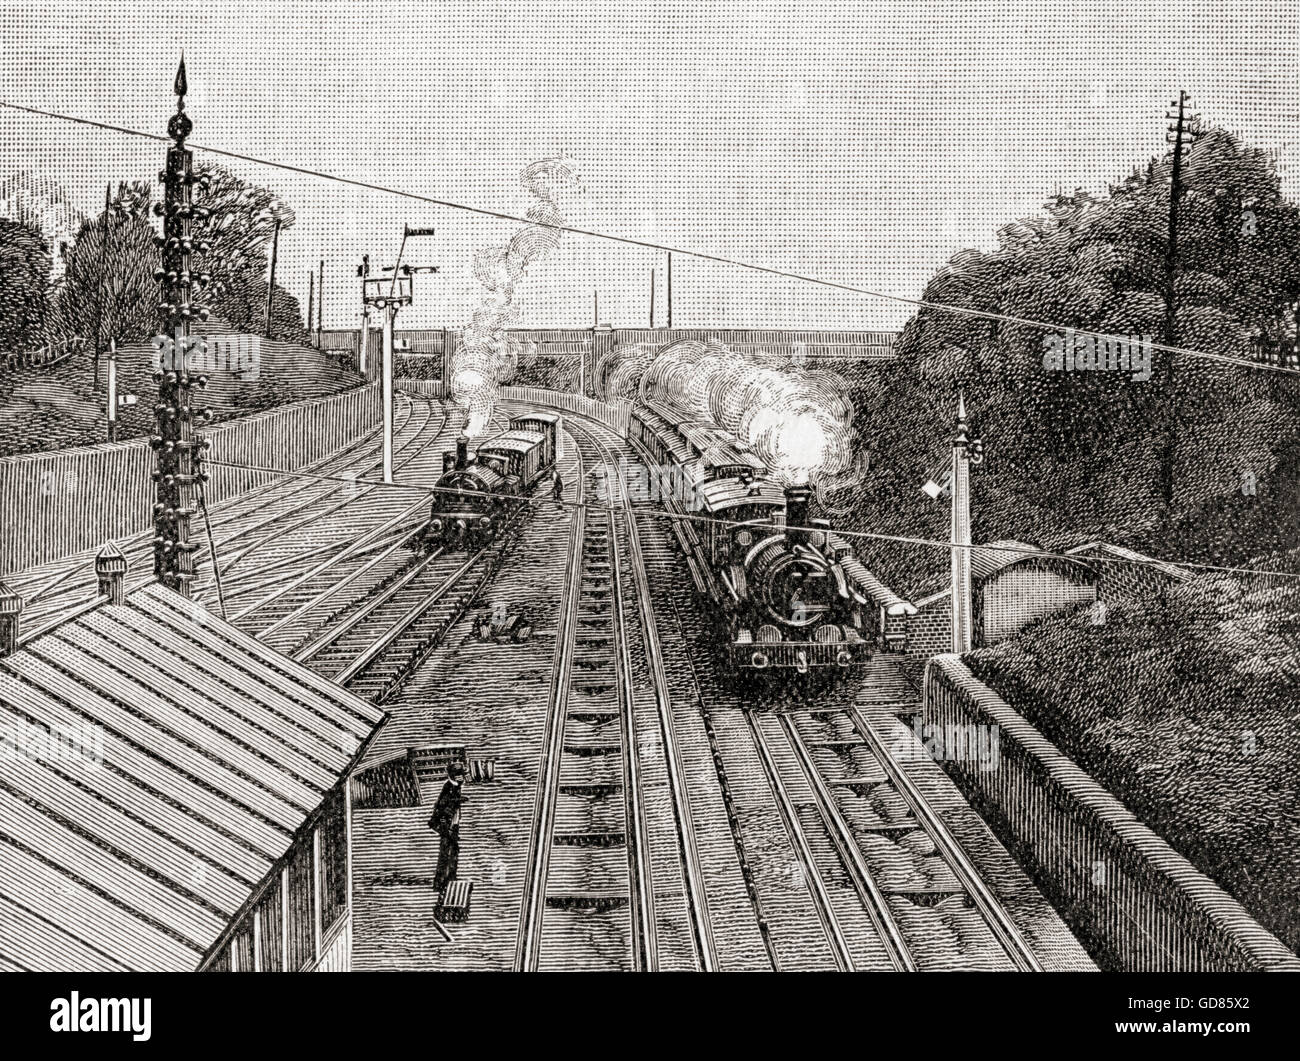 The Flying Dutchman, right, passing Acton station, London, England on the Great Western Railway at sixty miles an hour in the 19th century.  The Great Western Railway operated on a dual gauge system using a broad gauge of 7 ft (until 1892) and a standard gauge of 4 ft 8 1⁄2 in. Stock Photo